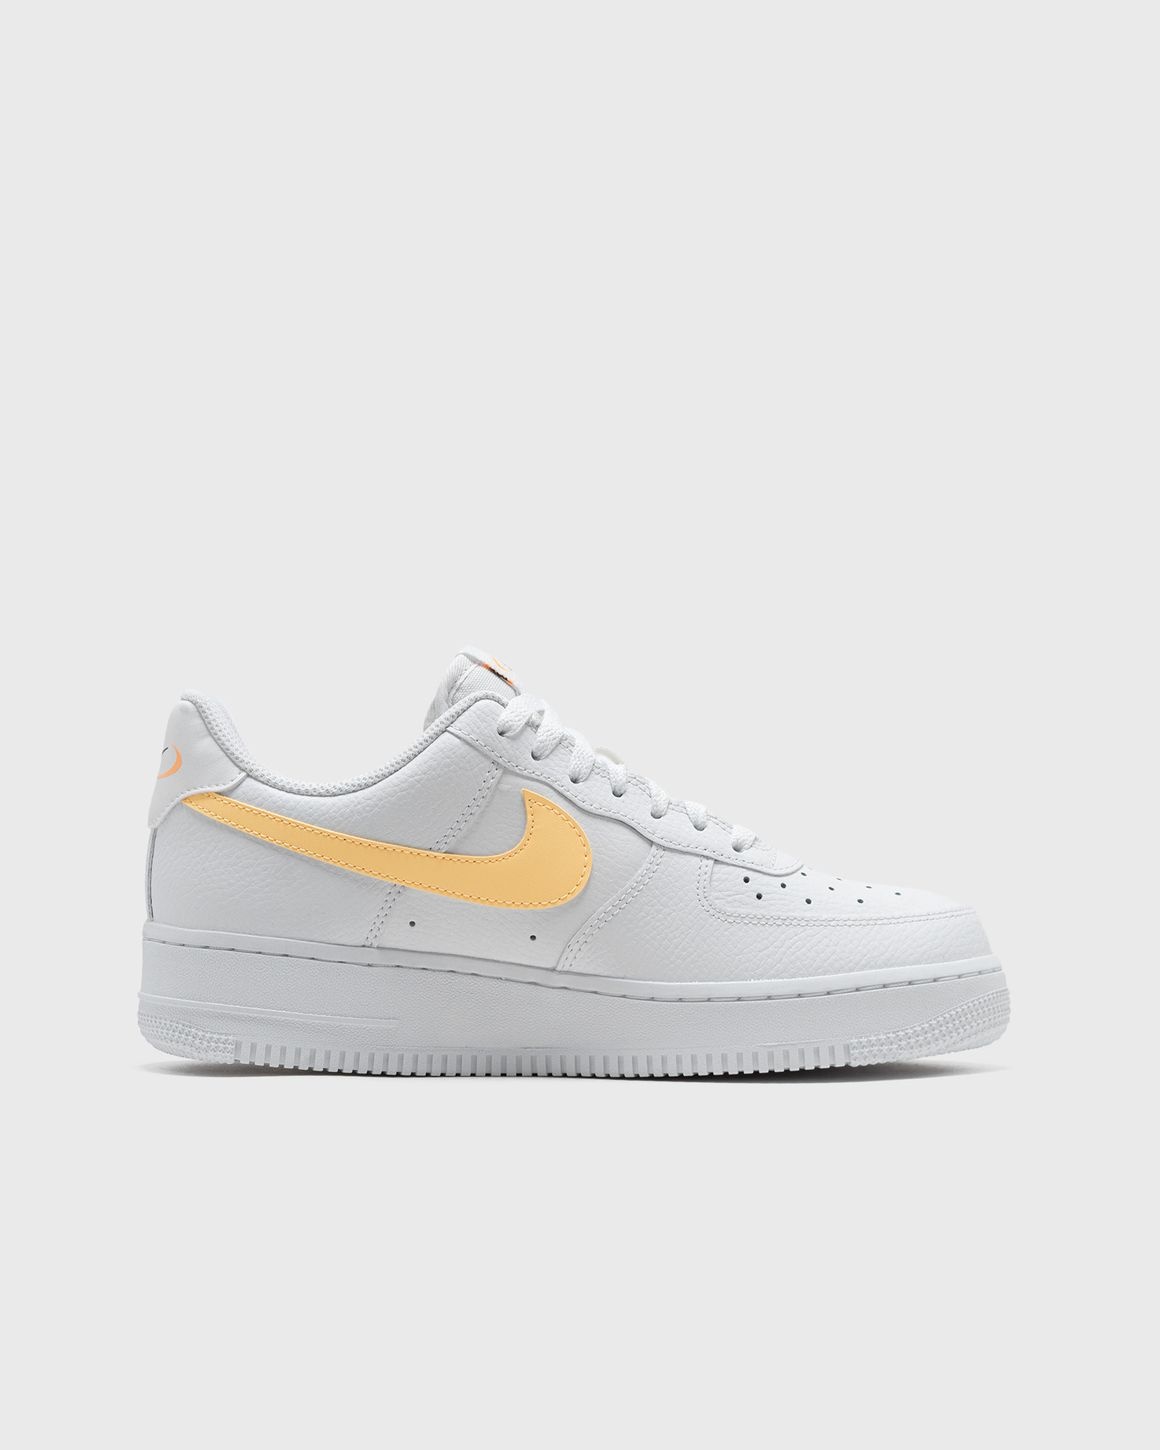 WMNS NIKE AIR FORCE 1 '07 - 3